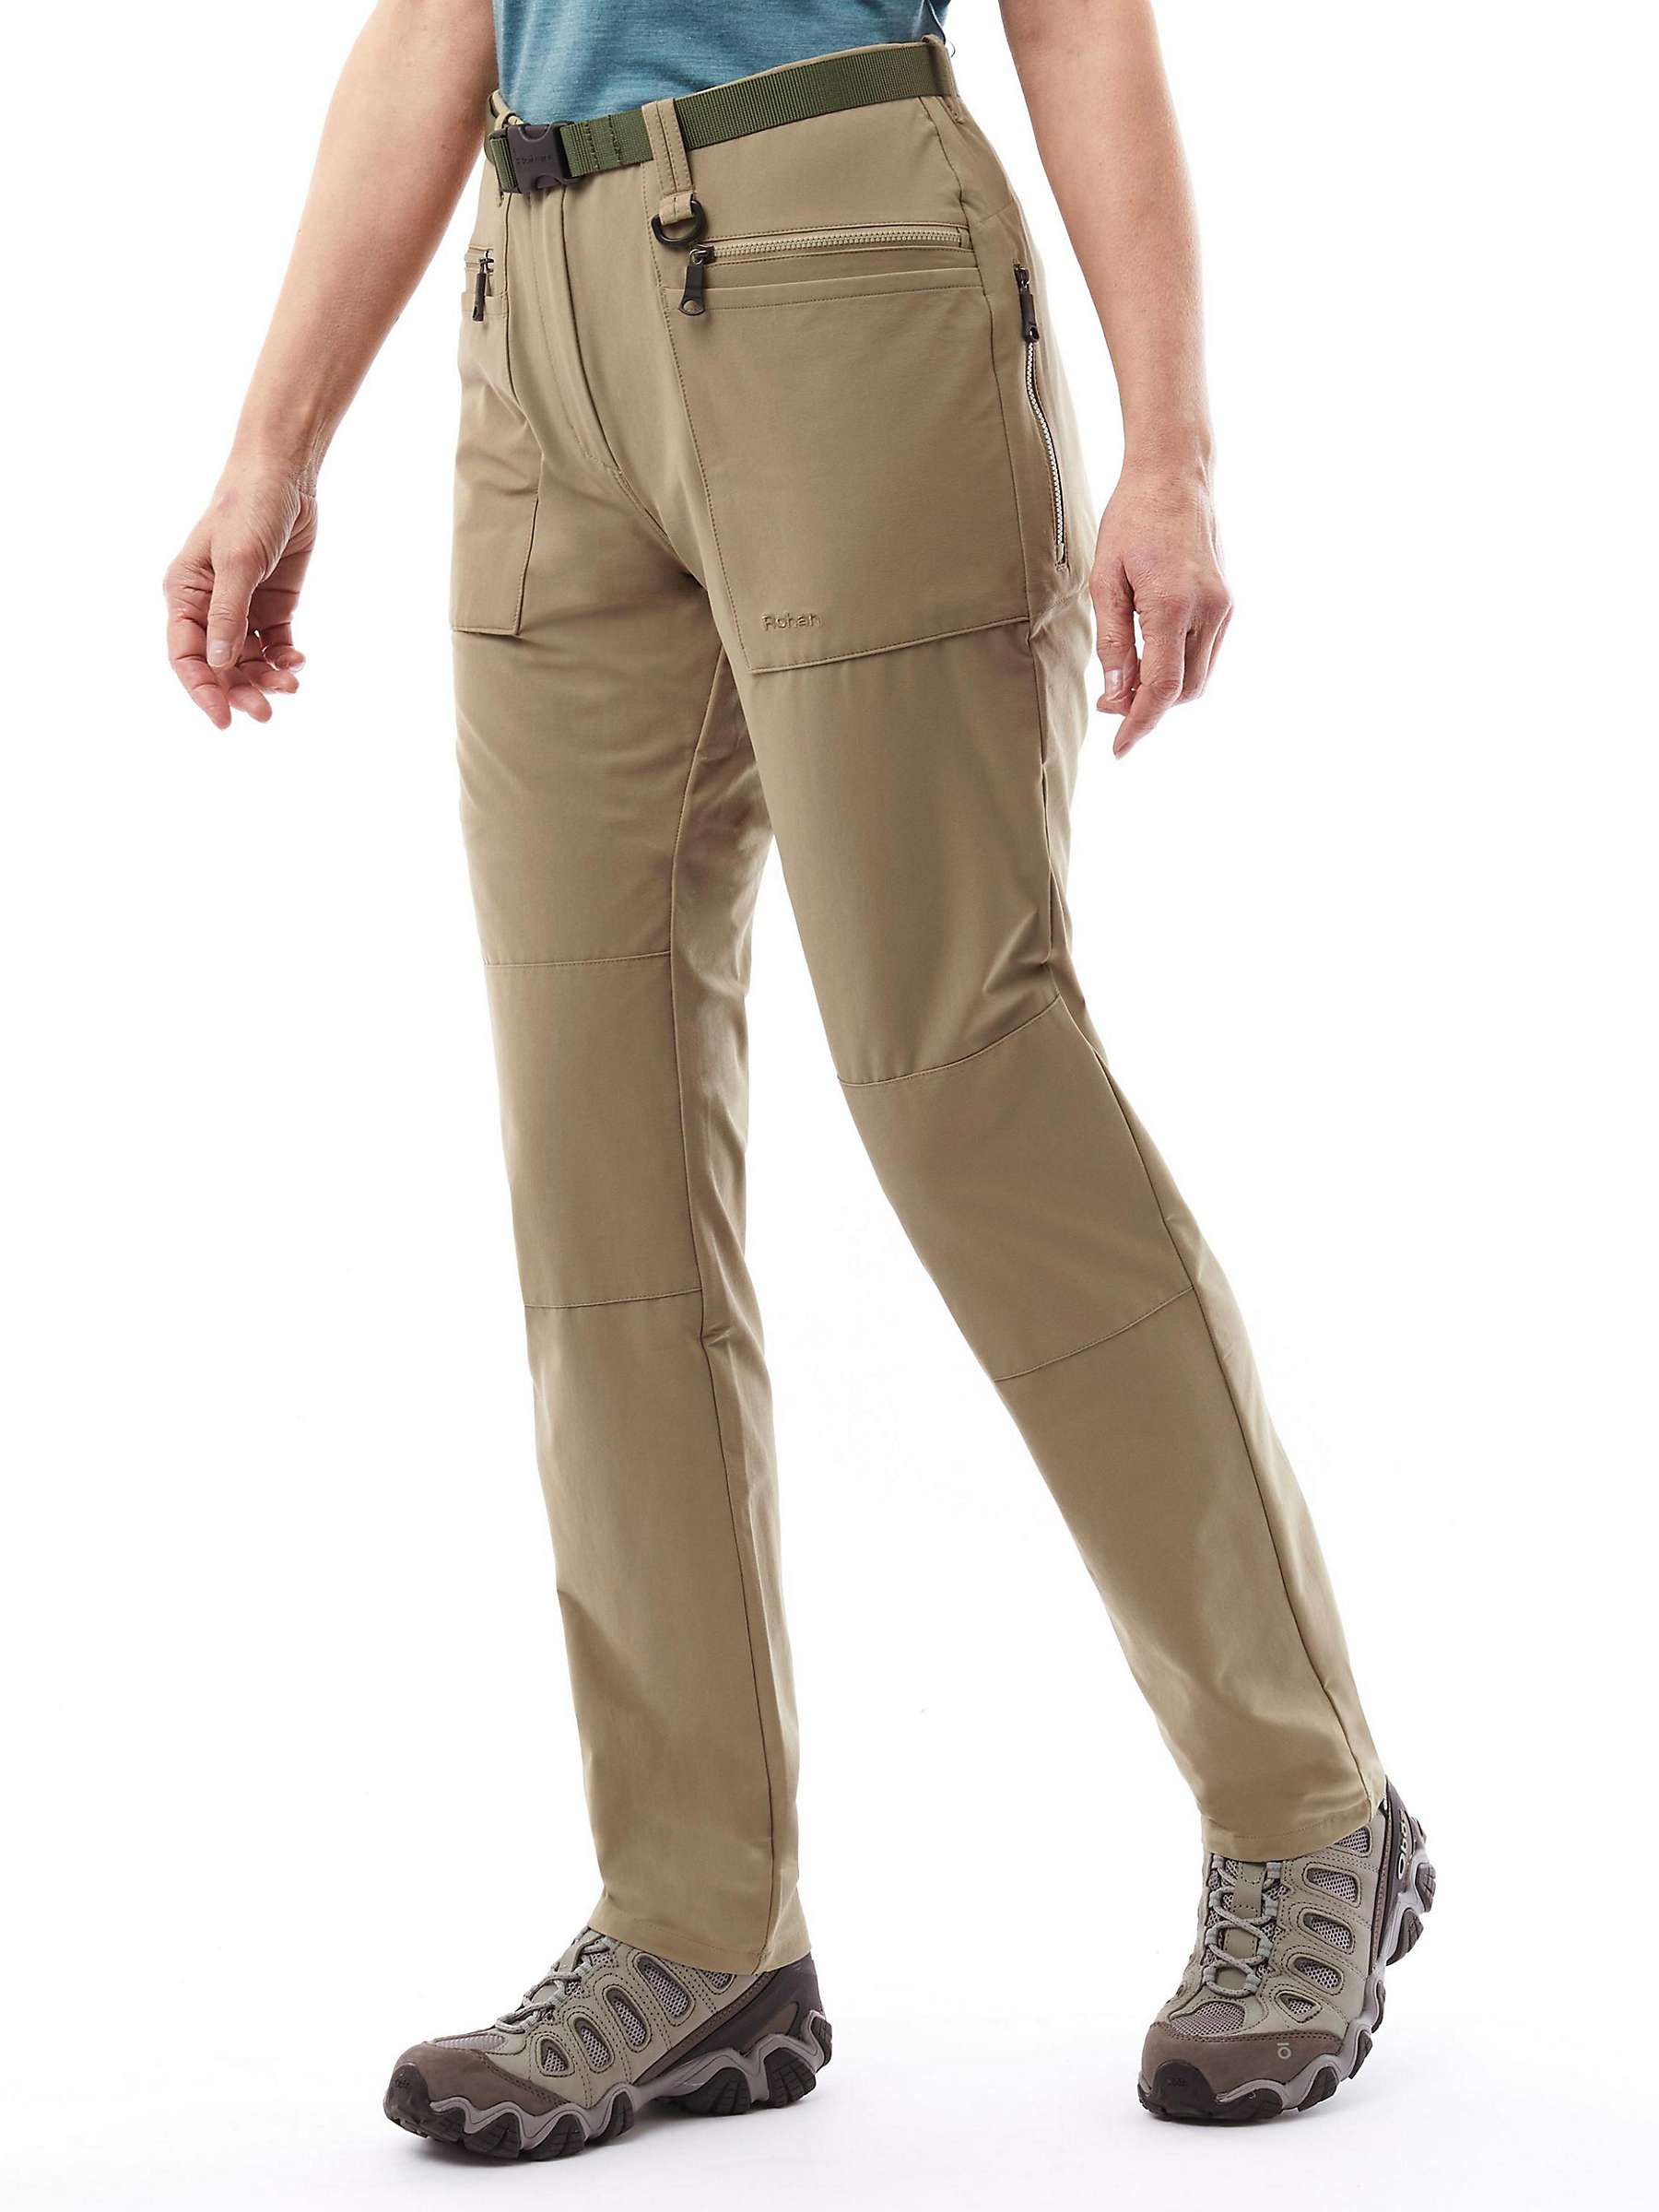 Buy Rohan Stretch Bags Outdoor Trousers Online at johnlewis.com